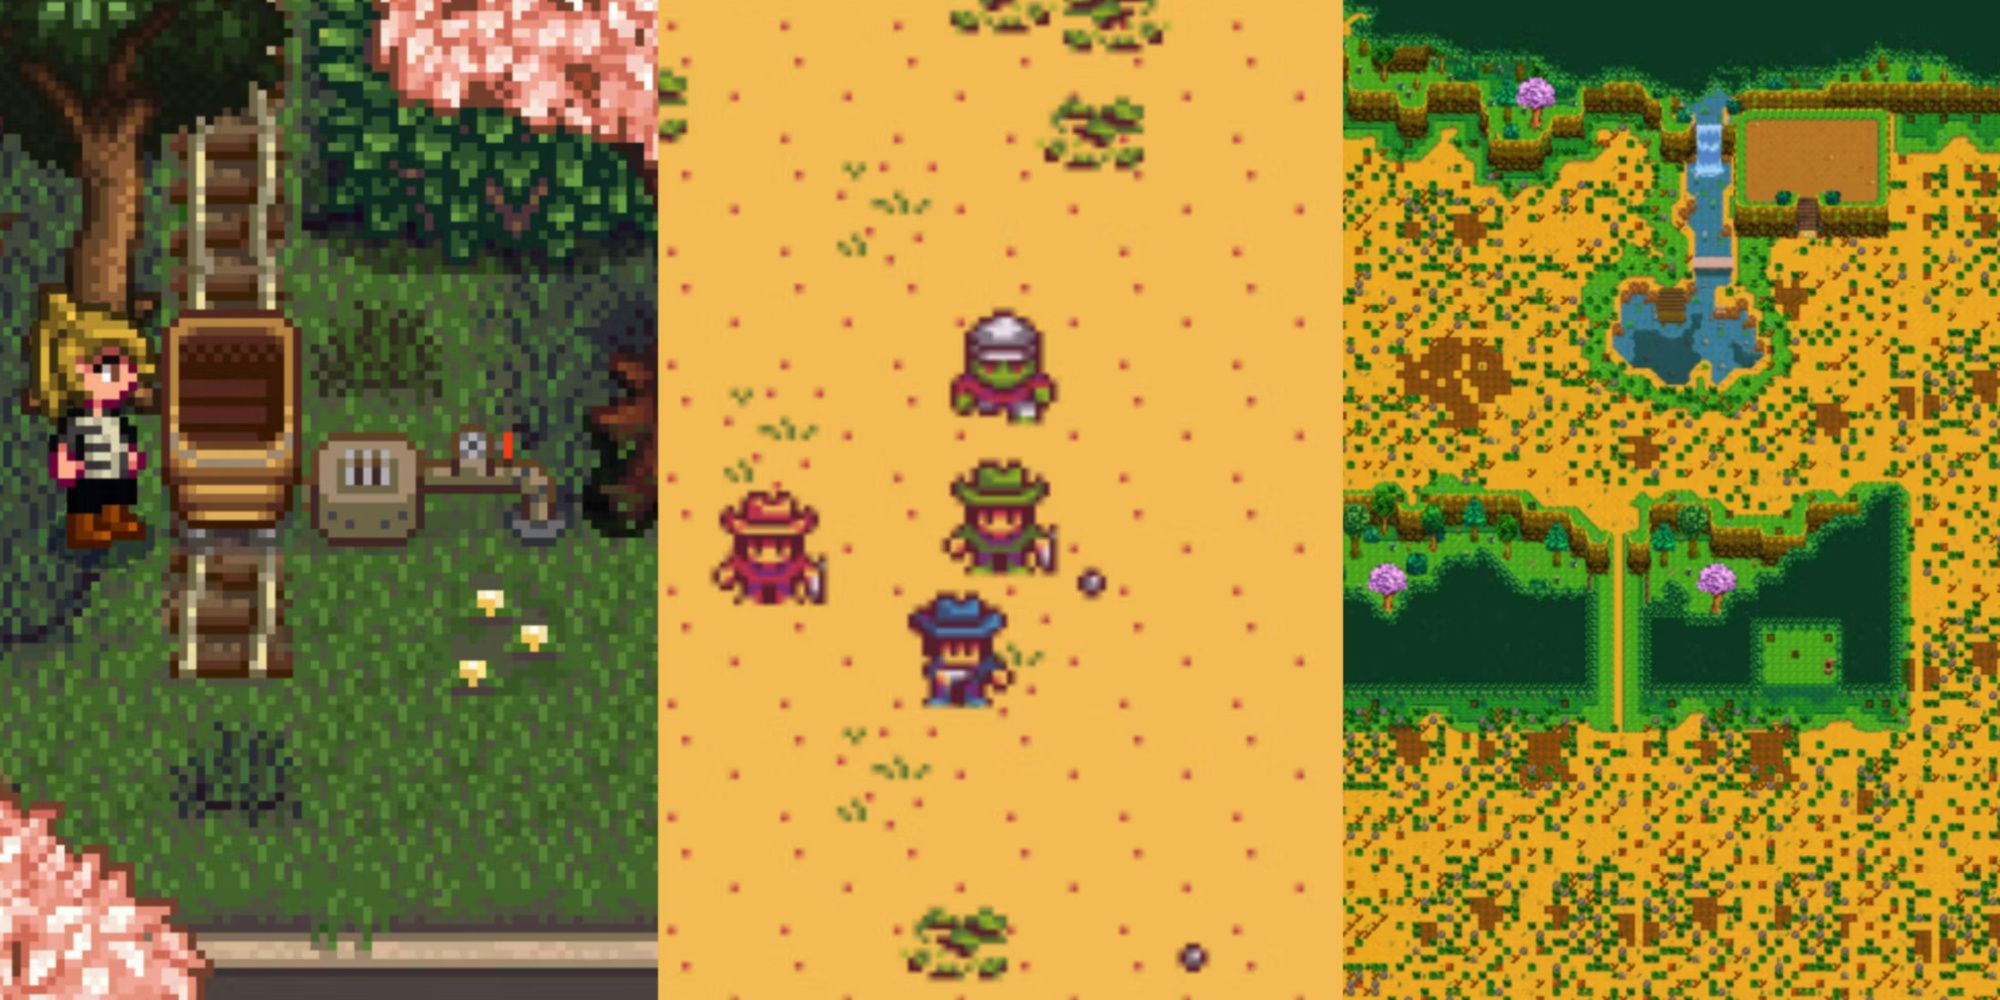 Look for multiplayer Stardew Valley on Switch this week - OpenCritic